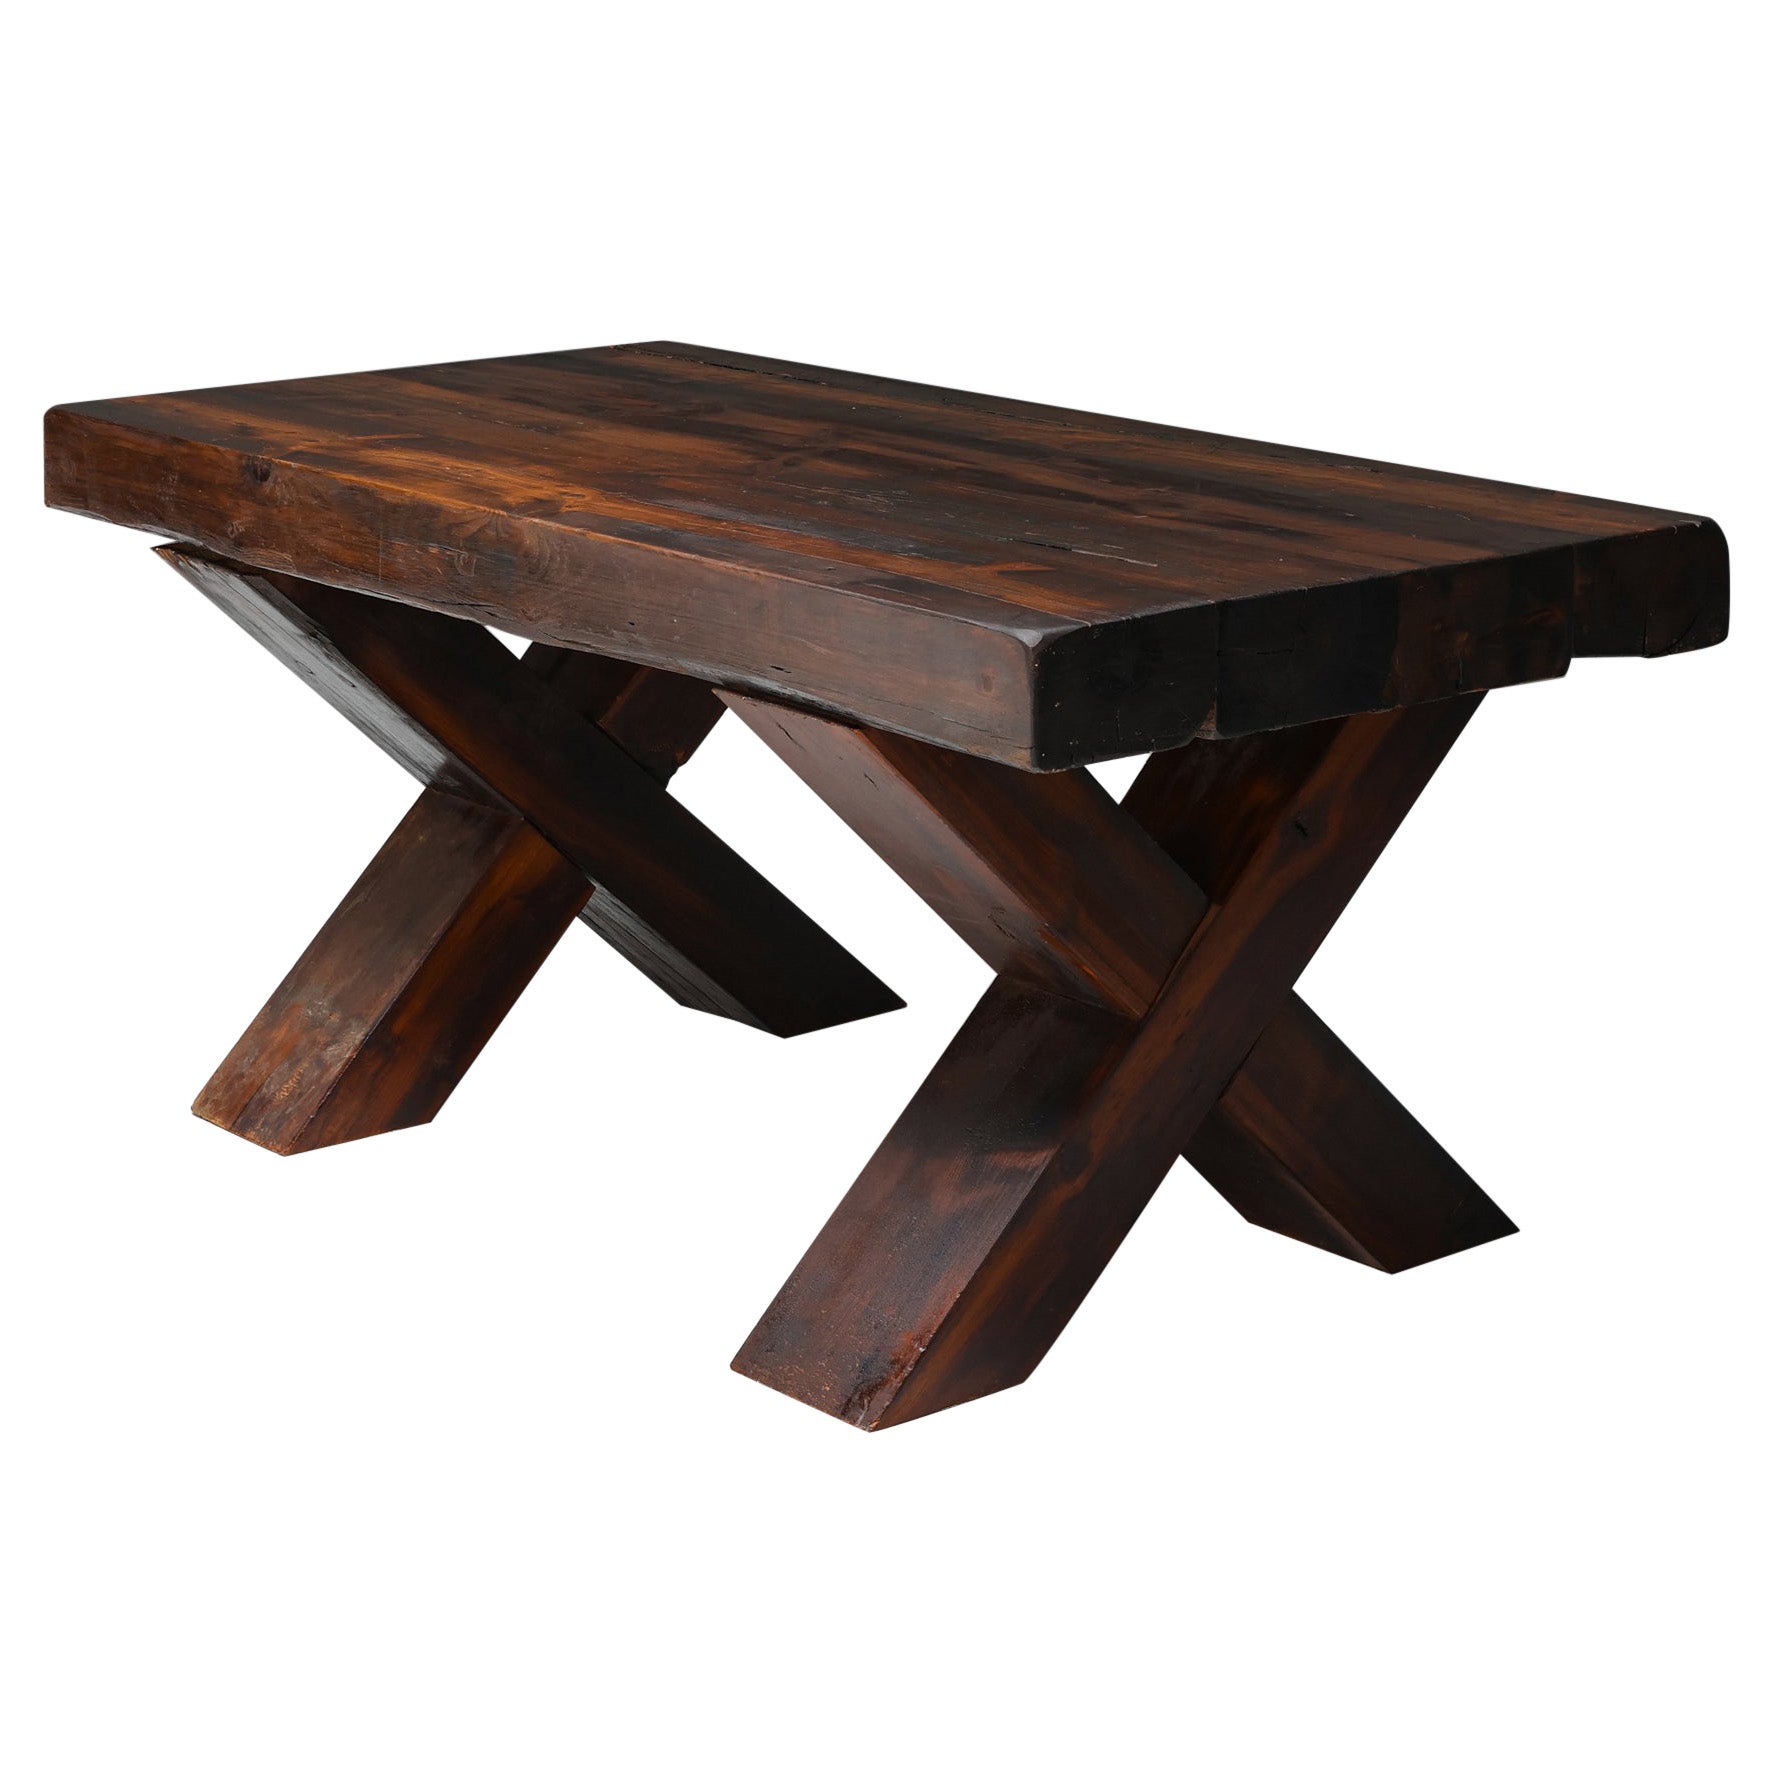 Rustic Brutalist Dark Wooden Dining Table with X-Legs, Italy, 1940's For Sale